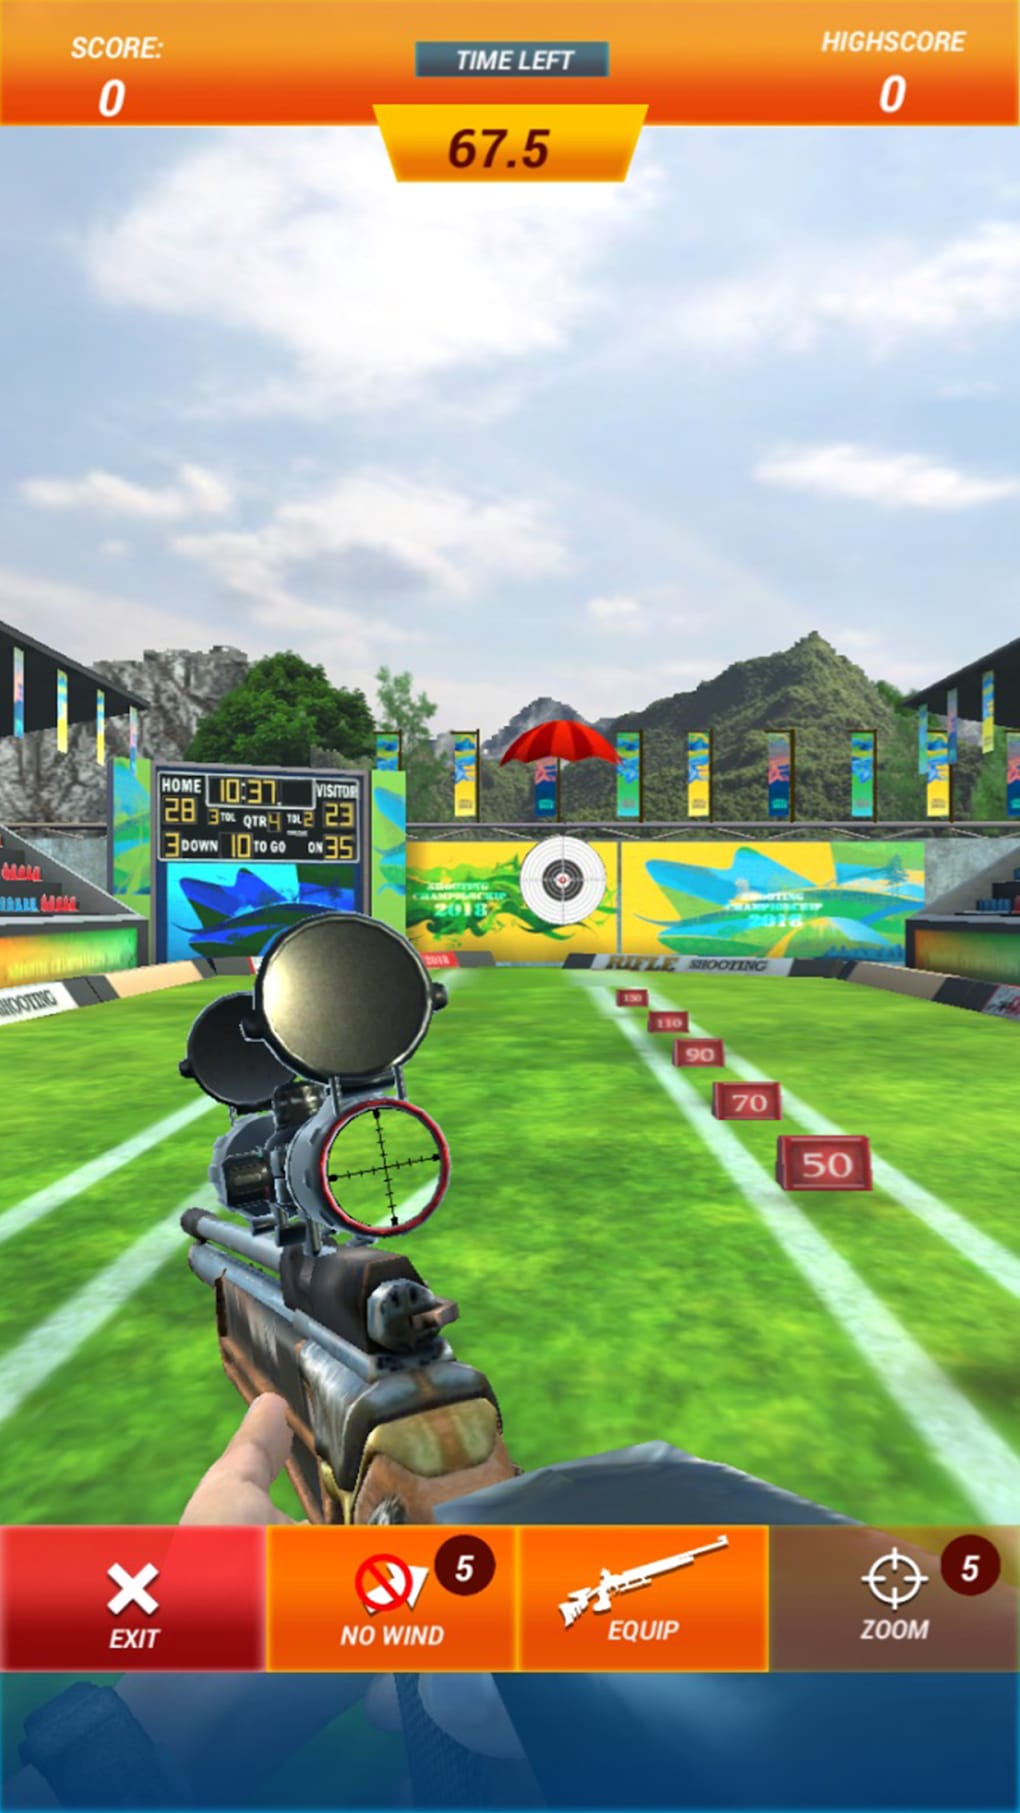 Best Shooting Range Games for Android